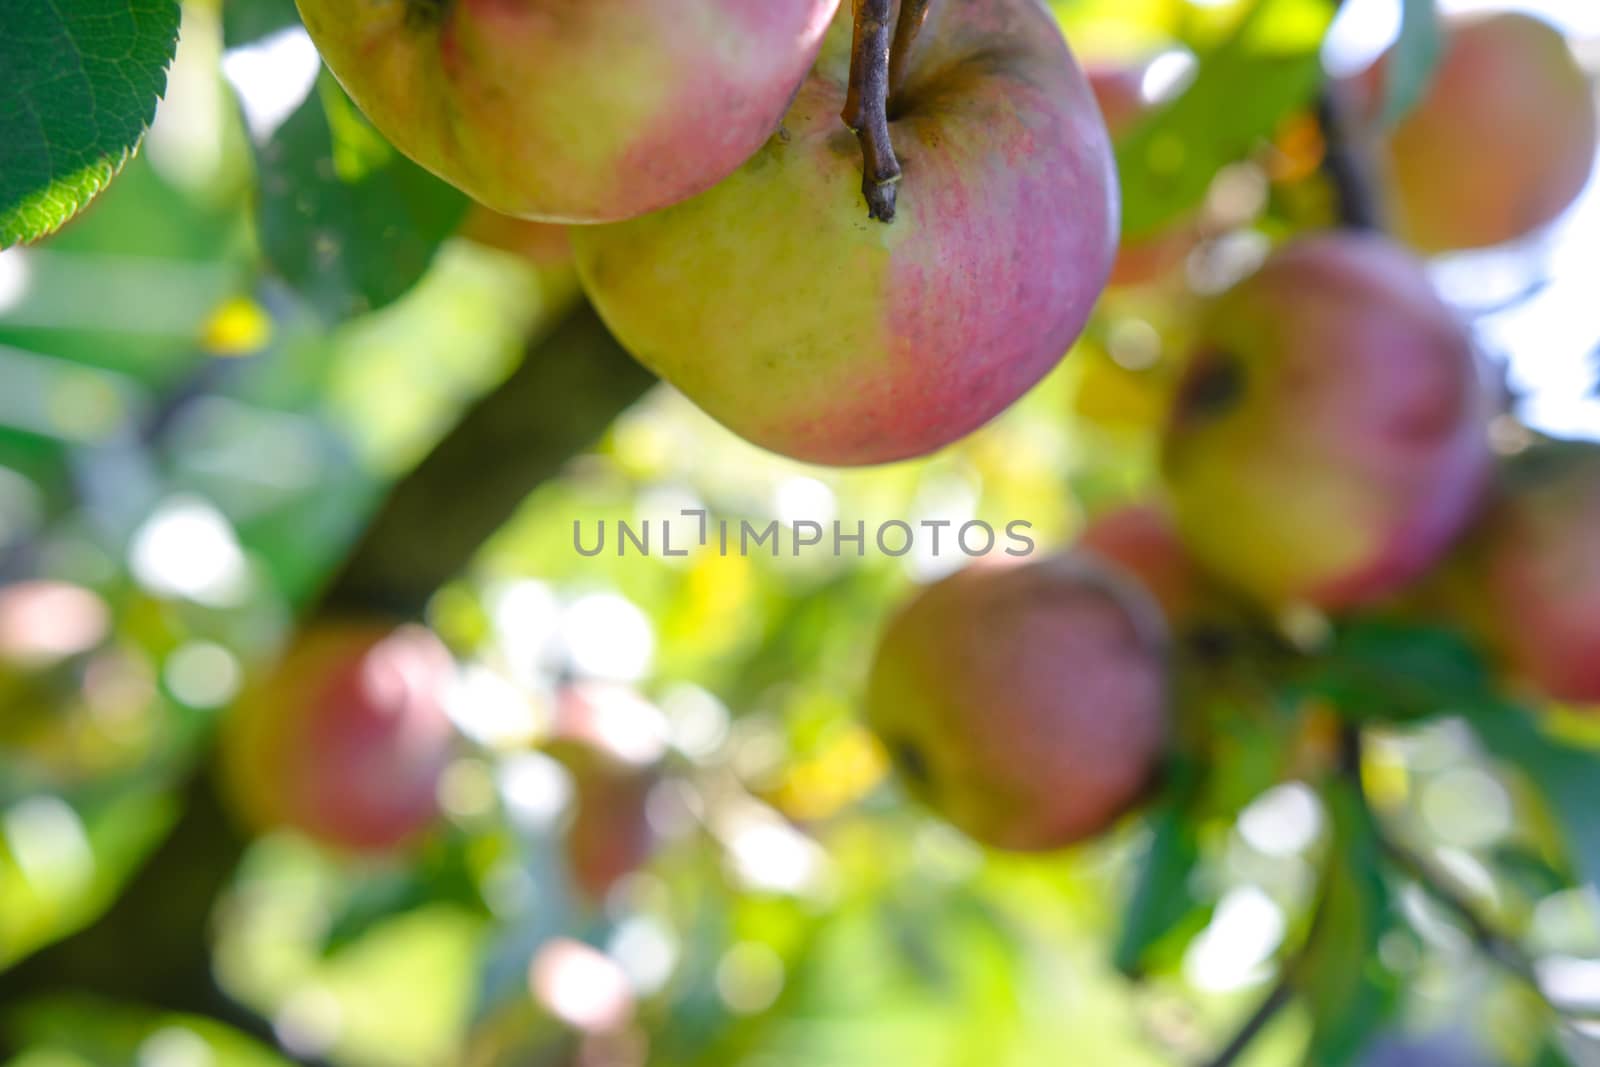 Ripe apples on the tree by wdnet_studio